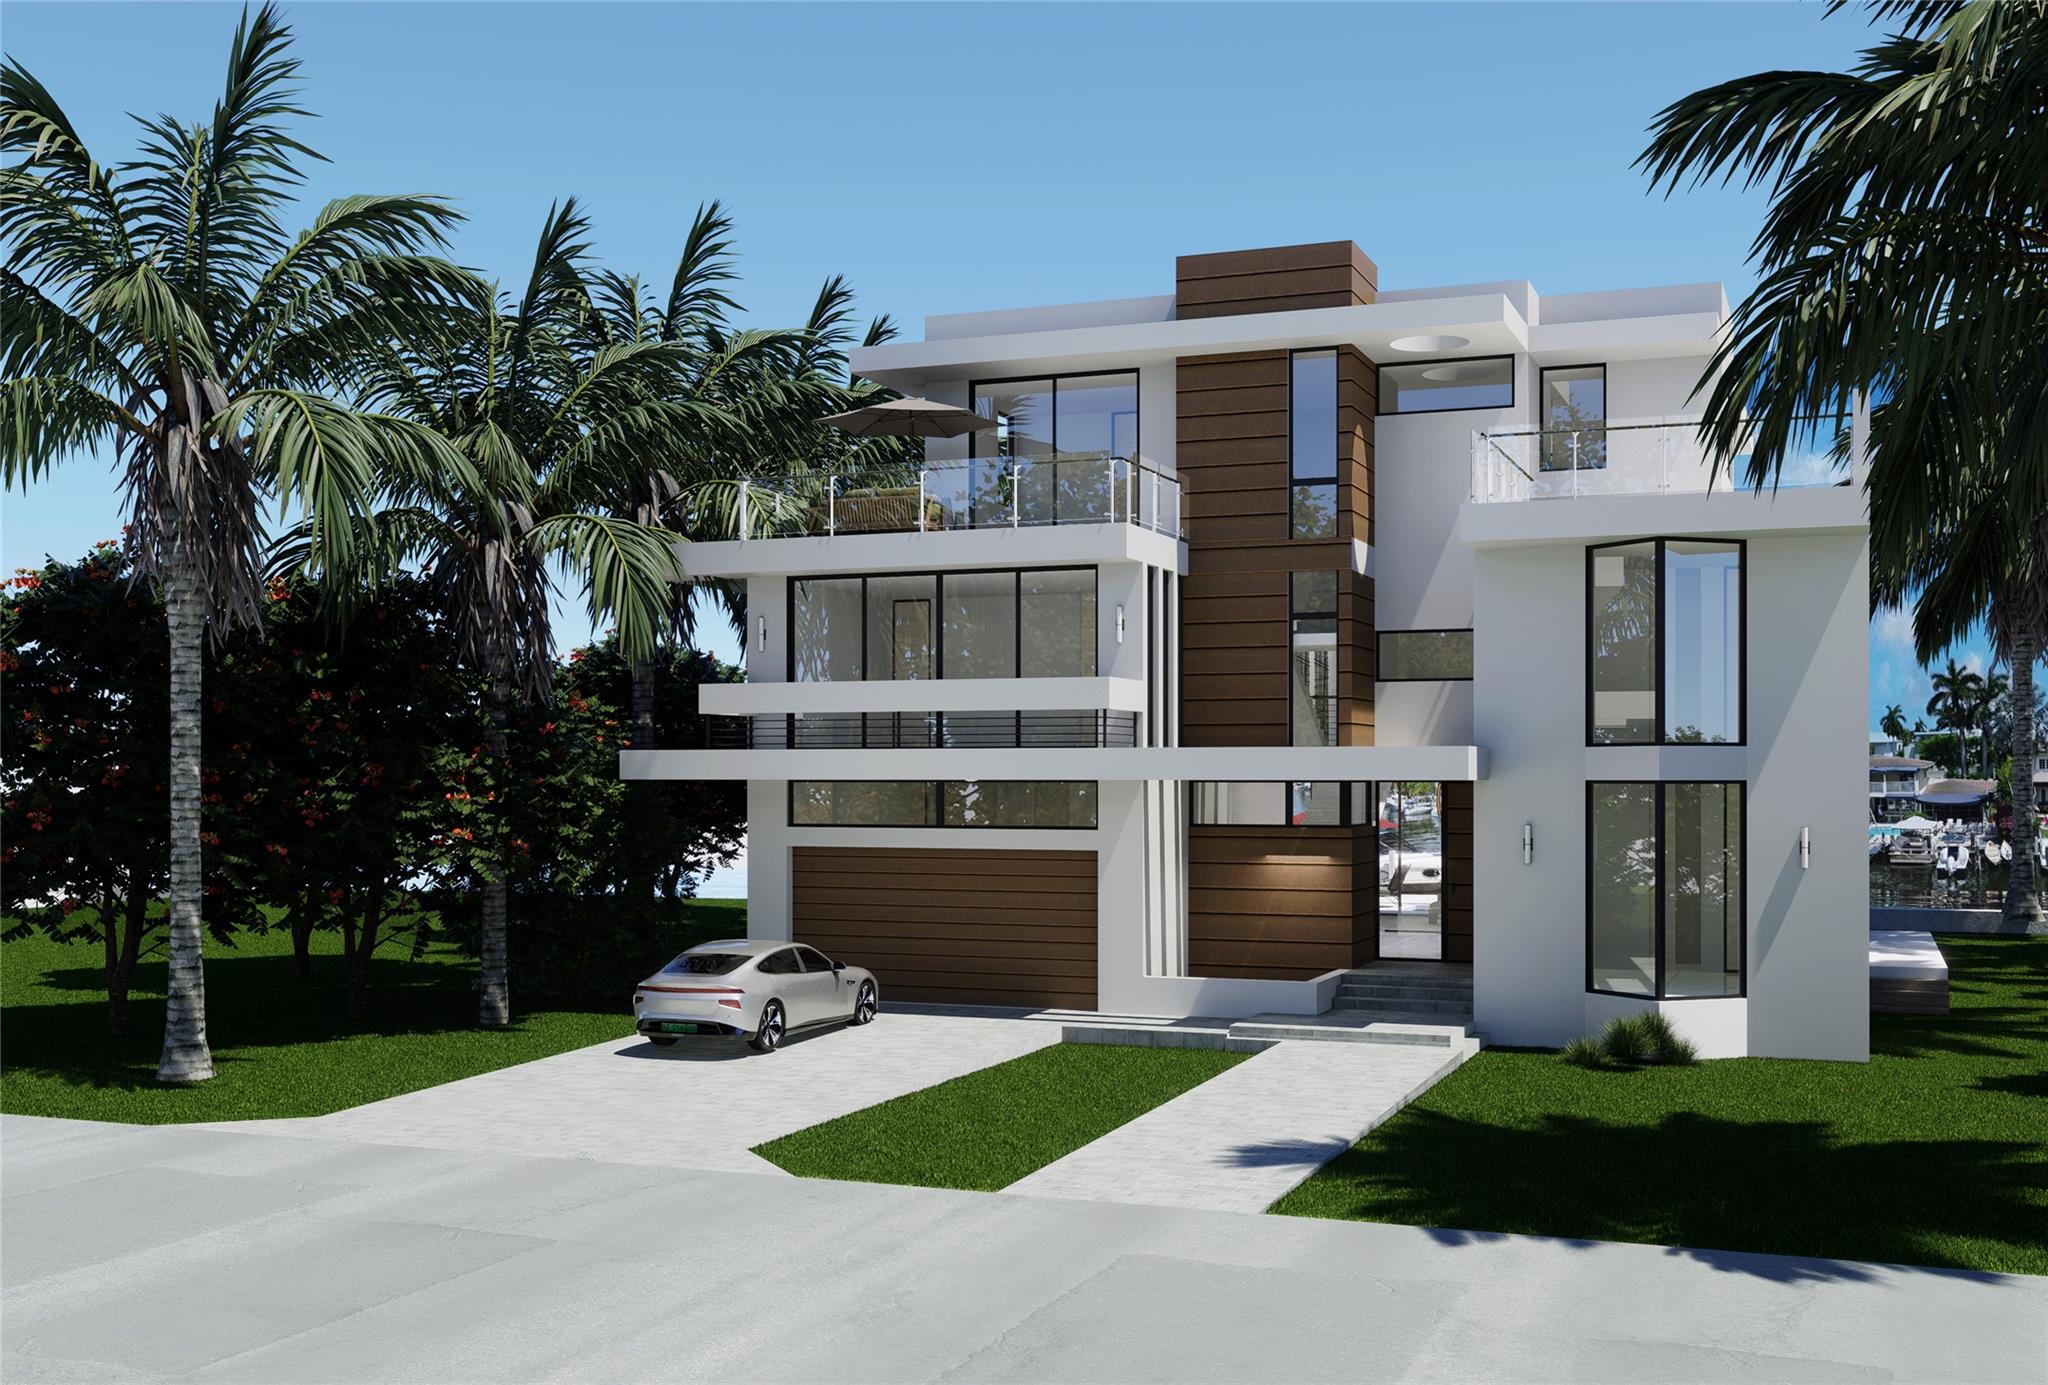 New Construction/Under construction. Contemporary waterfront estate in the heart of exclusive Lauderdale Harbors, Rio Vista. Modern masterpiece by acclaimed architect Robert Tuthill, built by Jeff Hendricks, this 3-story home has it all, including an elevator. Downtown Fort Lauderdale and Intracoastal views, walk to stores, restaurants, and Lauderdale Yacht Club. Designed to ensure comfort, practicality, and state-of-the-art living. Ocean access is 5 minutes to the Everglades Inlet by boat no fixed bridges, 10 mins to the FLL airport, Downtown, and beach. Perfect time to buy to customize finishes to your preference. Full plans are available upon inquiry. The renderings are artistic interpretations. Price may adjust during construction depending on the final finishes and features. The neighborhood is very family-friendly and a boater's dream, with its proximity to the Everglades Inlet and walking distance from the Lauderdale Yacht Club.
Lauderdale Harbors, a sub-division of the prestigious Rio Vista neighborhood, is a very residential, family, and pet-friendly neighborhood. It offers a Publix, Wynn Dixie (Aldi), and Whole Foods supermarkets within walking distance, in addition to various great restaurants and shopping, although it remains a secluded residential community. The ideal home for the live, work, and play lifestyle.
A little more about the features and finishes, the house has a German design Poggenpohl kitchen, Italian Pedini bathrooms as well as imported Italian porcelain tiles throughout, with wood in the Primary suite, which has his and hers walk in closets, double vanities and lavatories, and dreamy views of the canal and Rio Vista. There is a walk in ample pantry, and plenty of storage room throughout the house. EV sockets in the 2 car garage, and ample parking on the driveway. The clubroom on the rooftop and wraparound terrace are perfect for entertaining or simply enjoying the fabulous sunrise/sunset views. Each bedroom has generous walk-in closets and are all ensuite. This is a dream home in the best neighborhood. Delivery is estimated to Spring 2024.